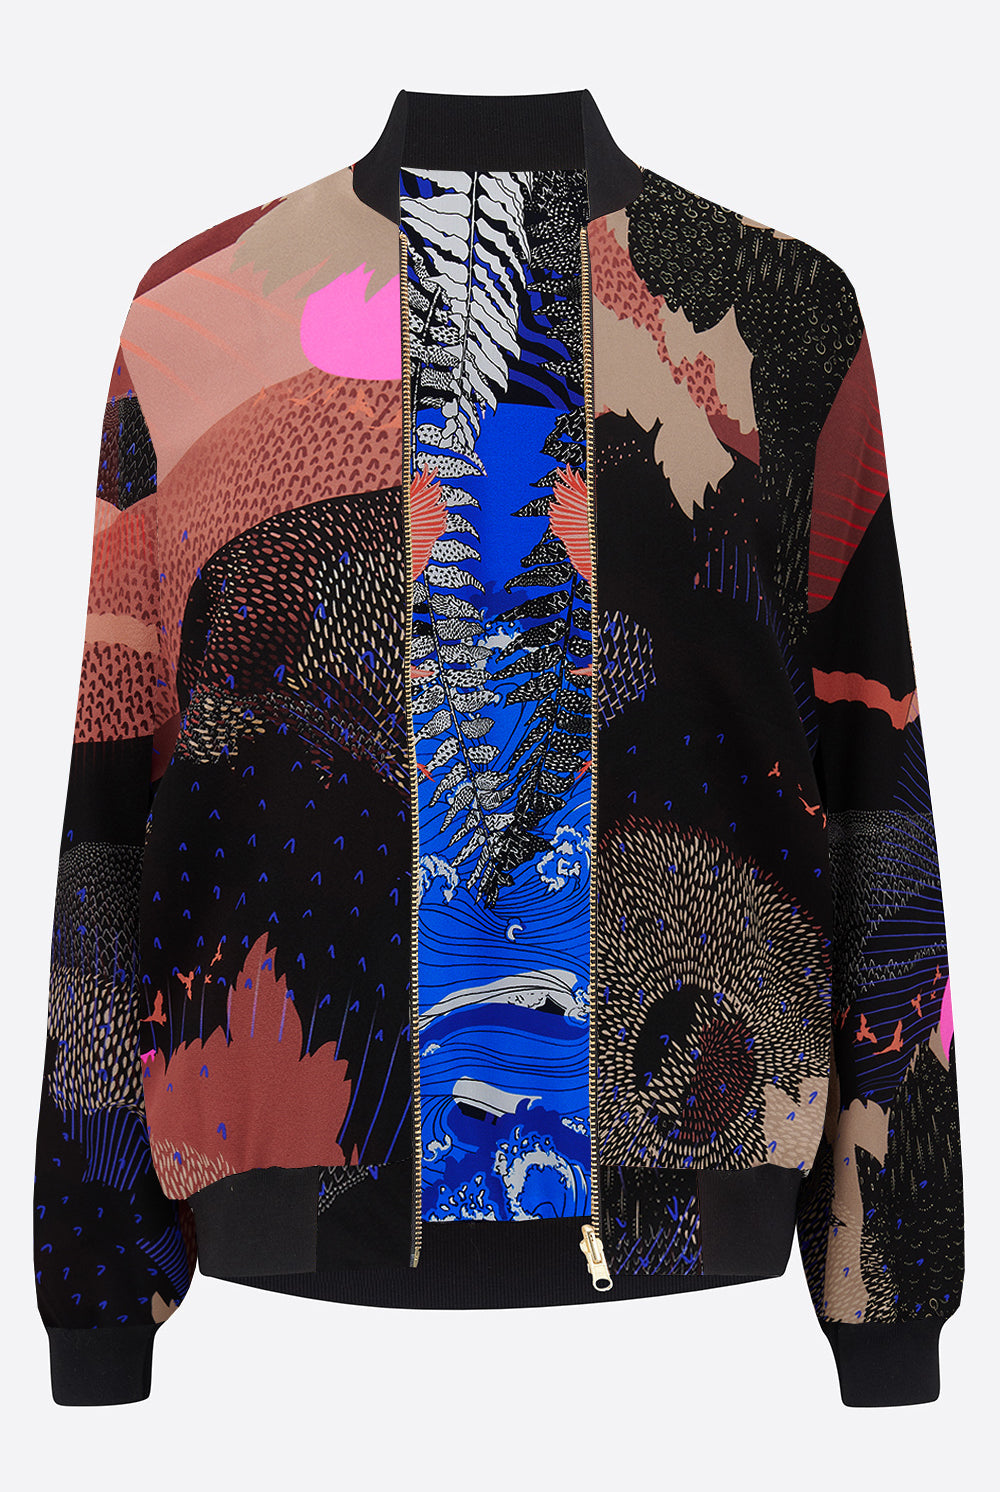 A reversible silk bomber jacket with pink, blue and black 